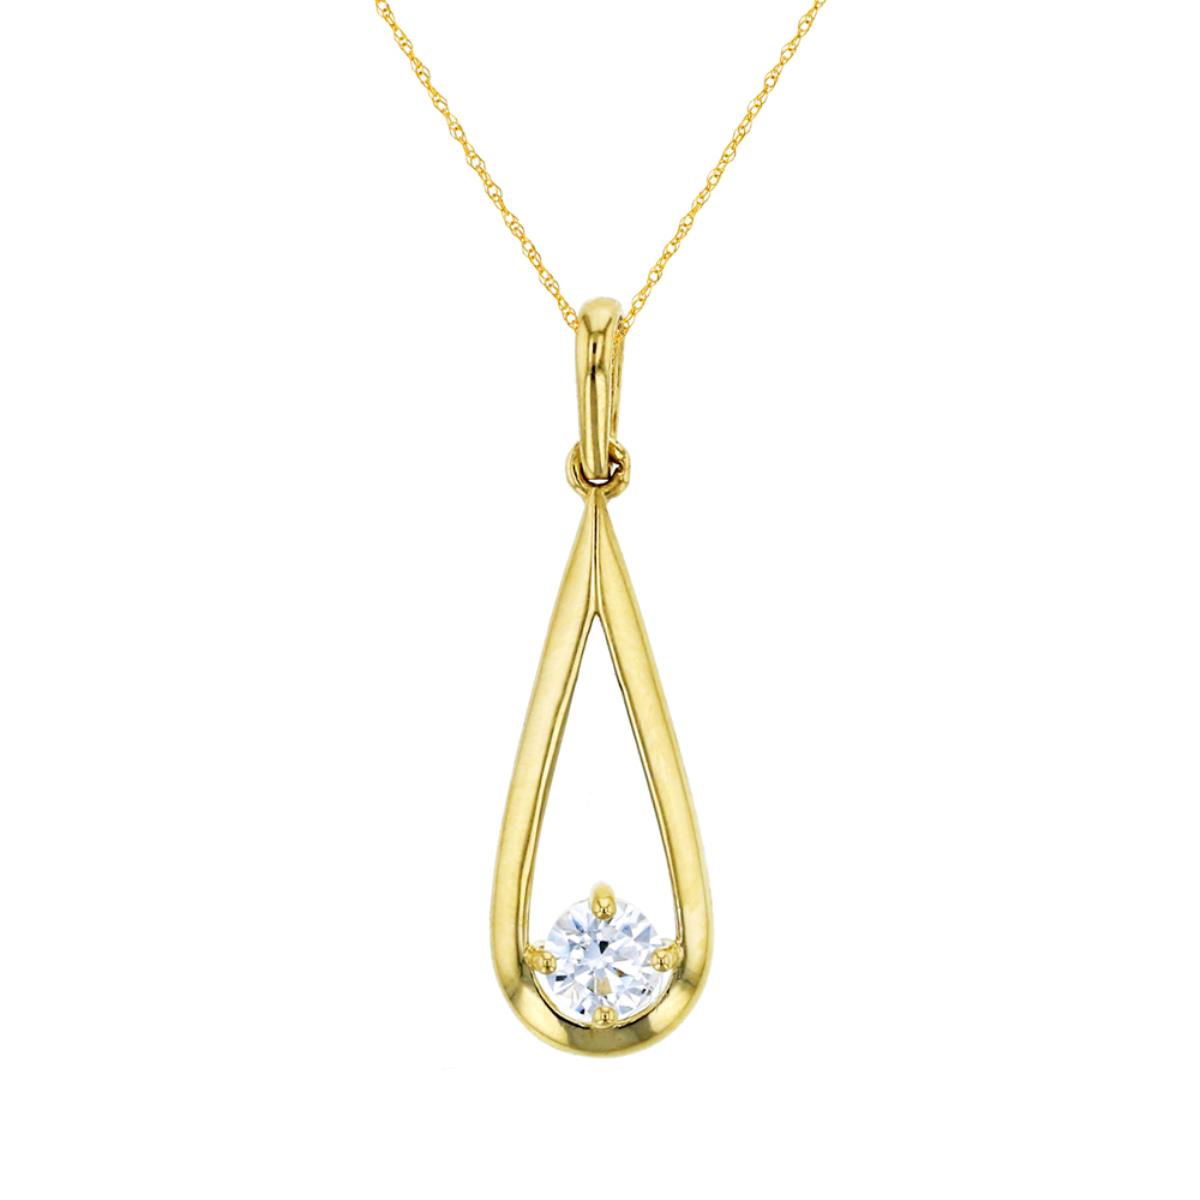 14K Yellow Gold Polished Tear Drop 3.50mm CZ Dangling 18" Rope Chain Necklace